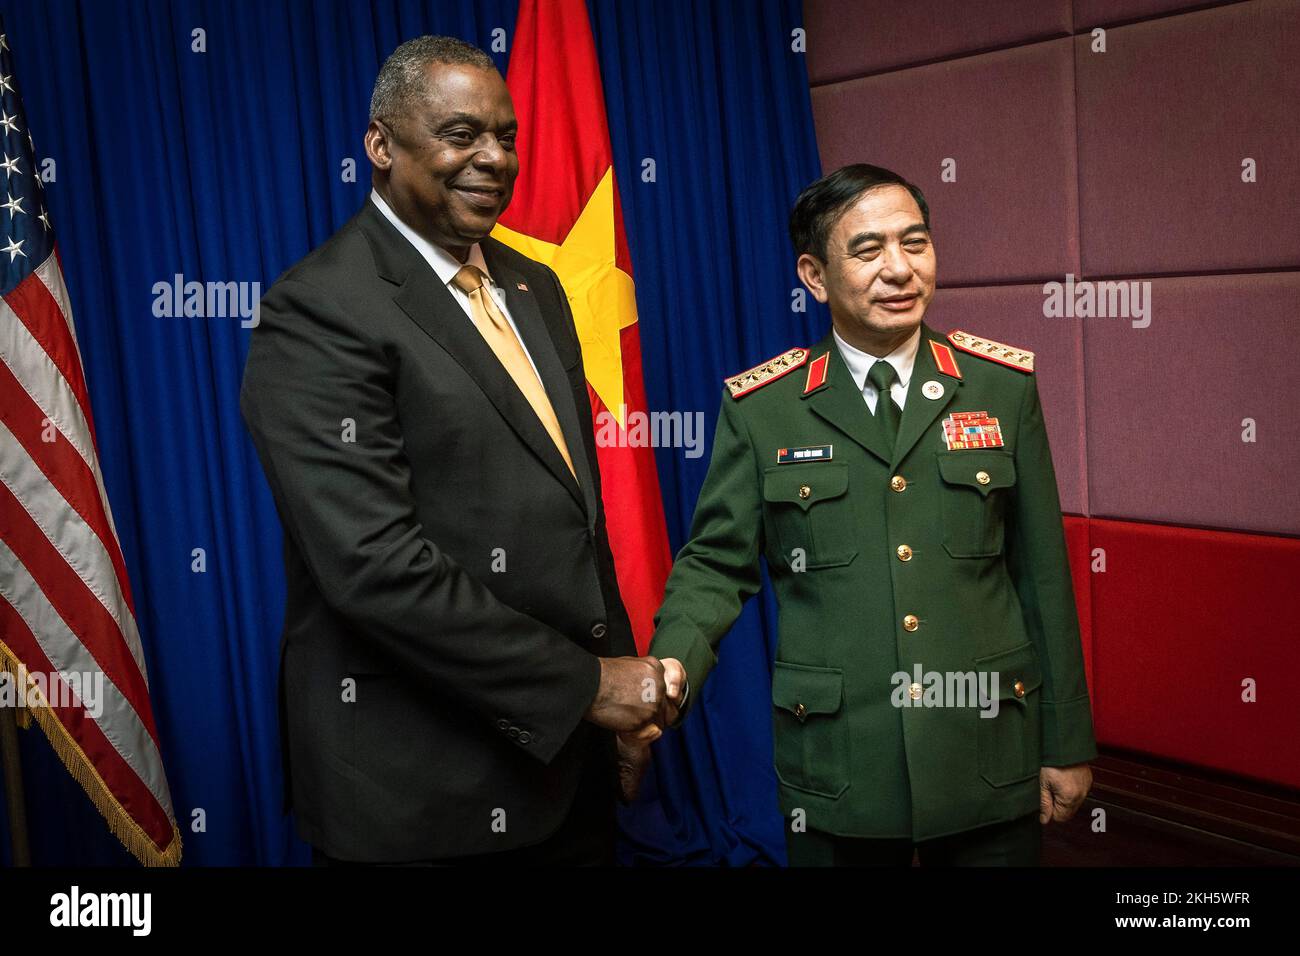 Siem Reap, Cambodia. 22nd Nov, 2022. U.S. Secretary of Defense Lloyd J. Austin III, left, shakes hands with Vietnamese Minister of Defence Gen. Phan Van Giang on the sidelines of the 9th Association of Southeast Asia Nations Defense Ministers Meeting, November 22, 2022 in Siem Reap, Cambodia. Credit: Chad J. McNeeley/DOD/Alamy Live News Stock Photo